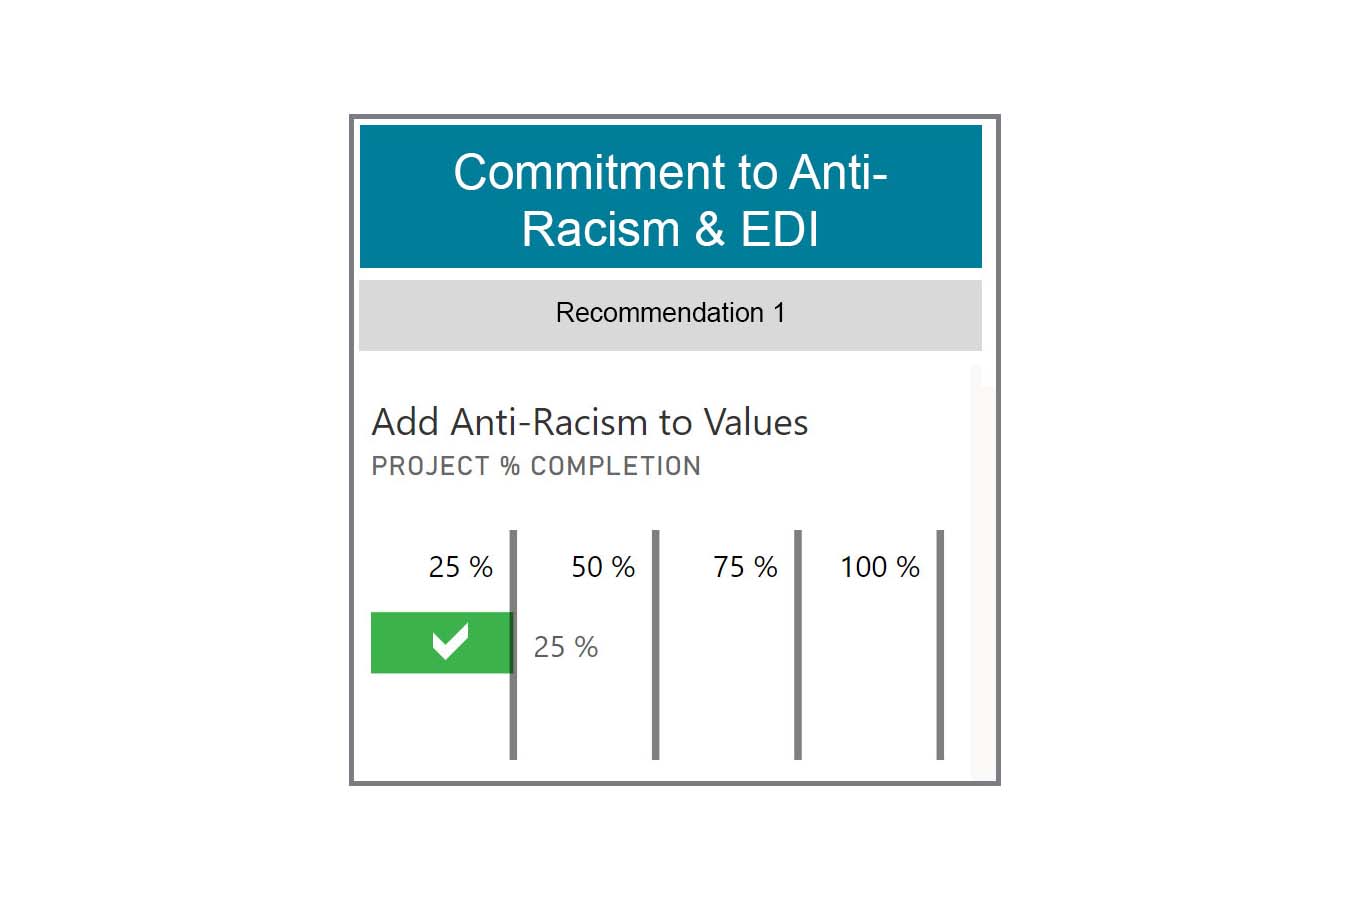 Commitment to Anti-Racism and EDI recommendation 1